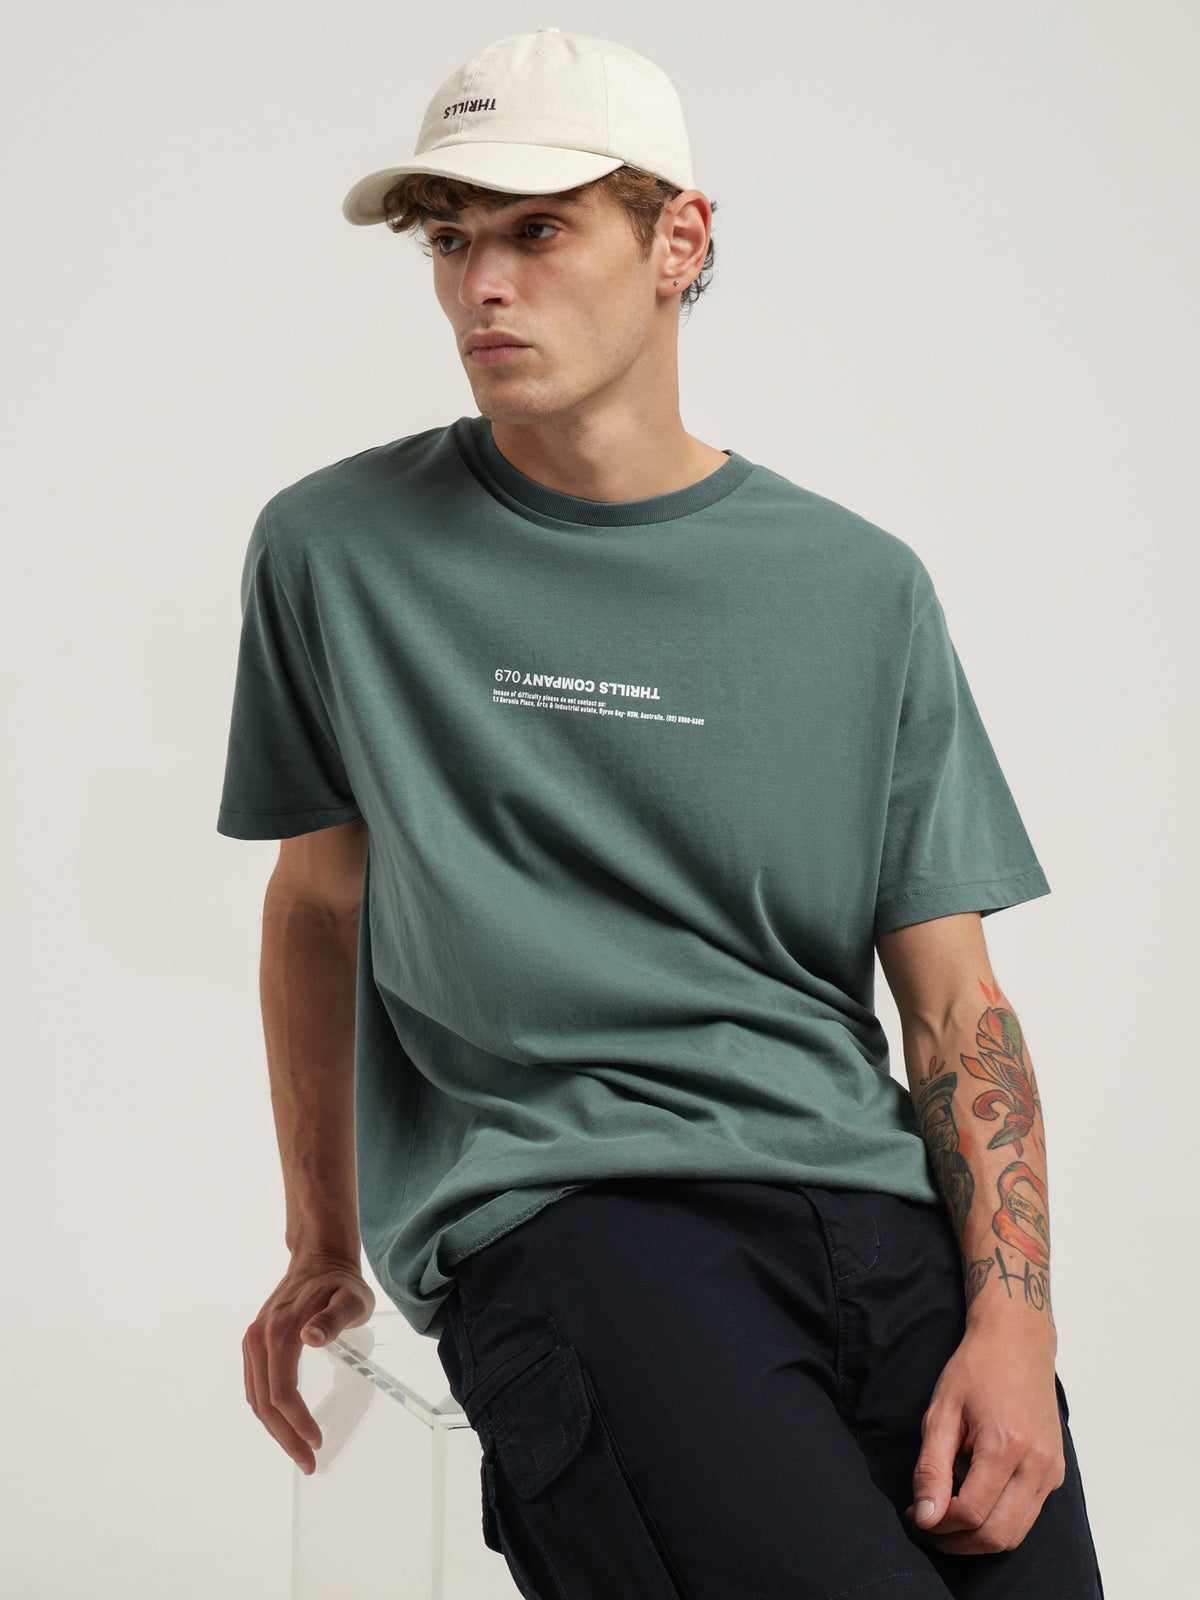 Narcissus Merch Fit T-Shirt in Teal